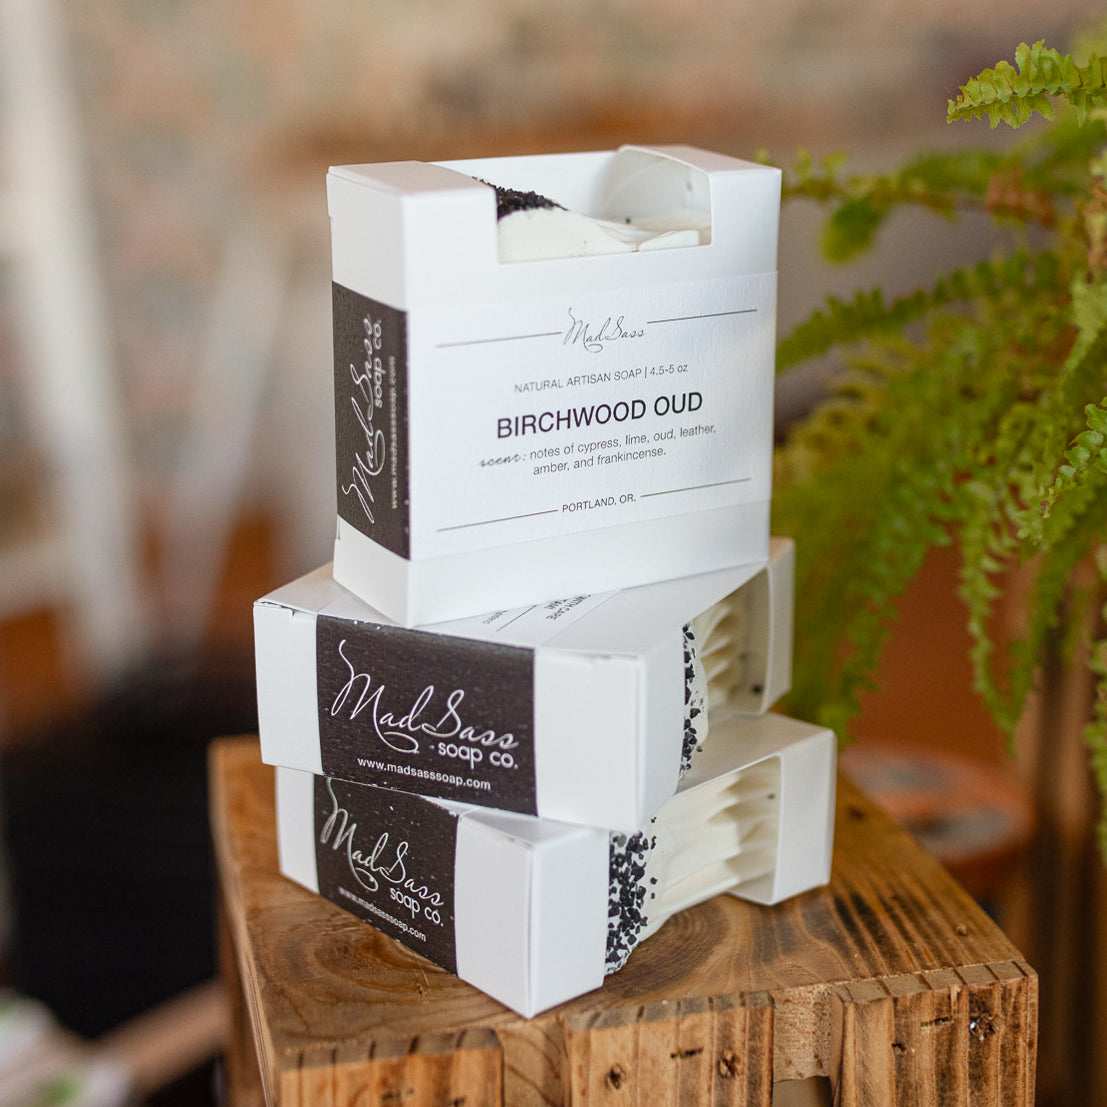 Three boxes of Birchwood Oud soap stacked on top of each other on a wooden block.